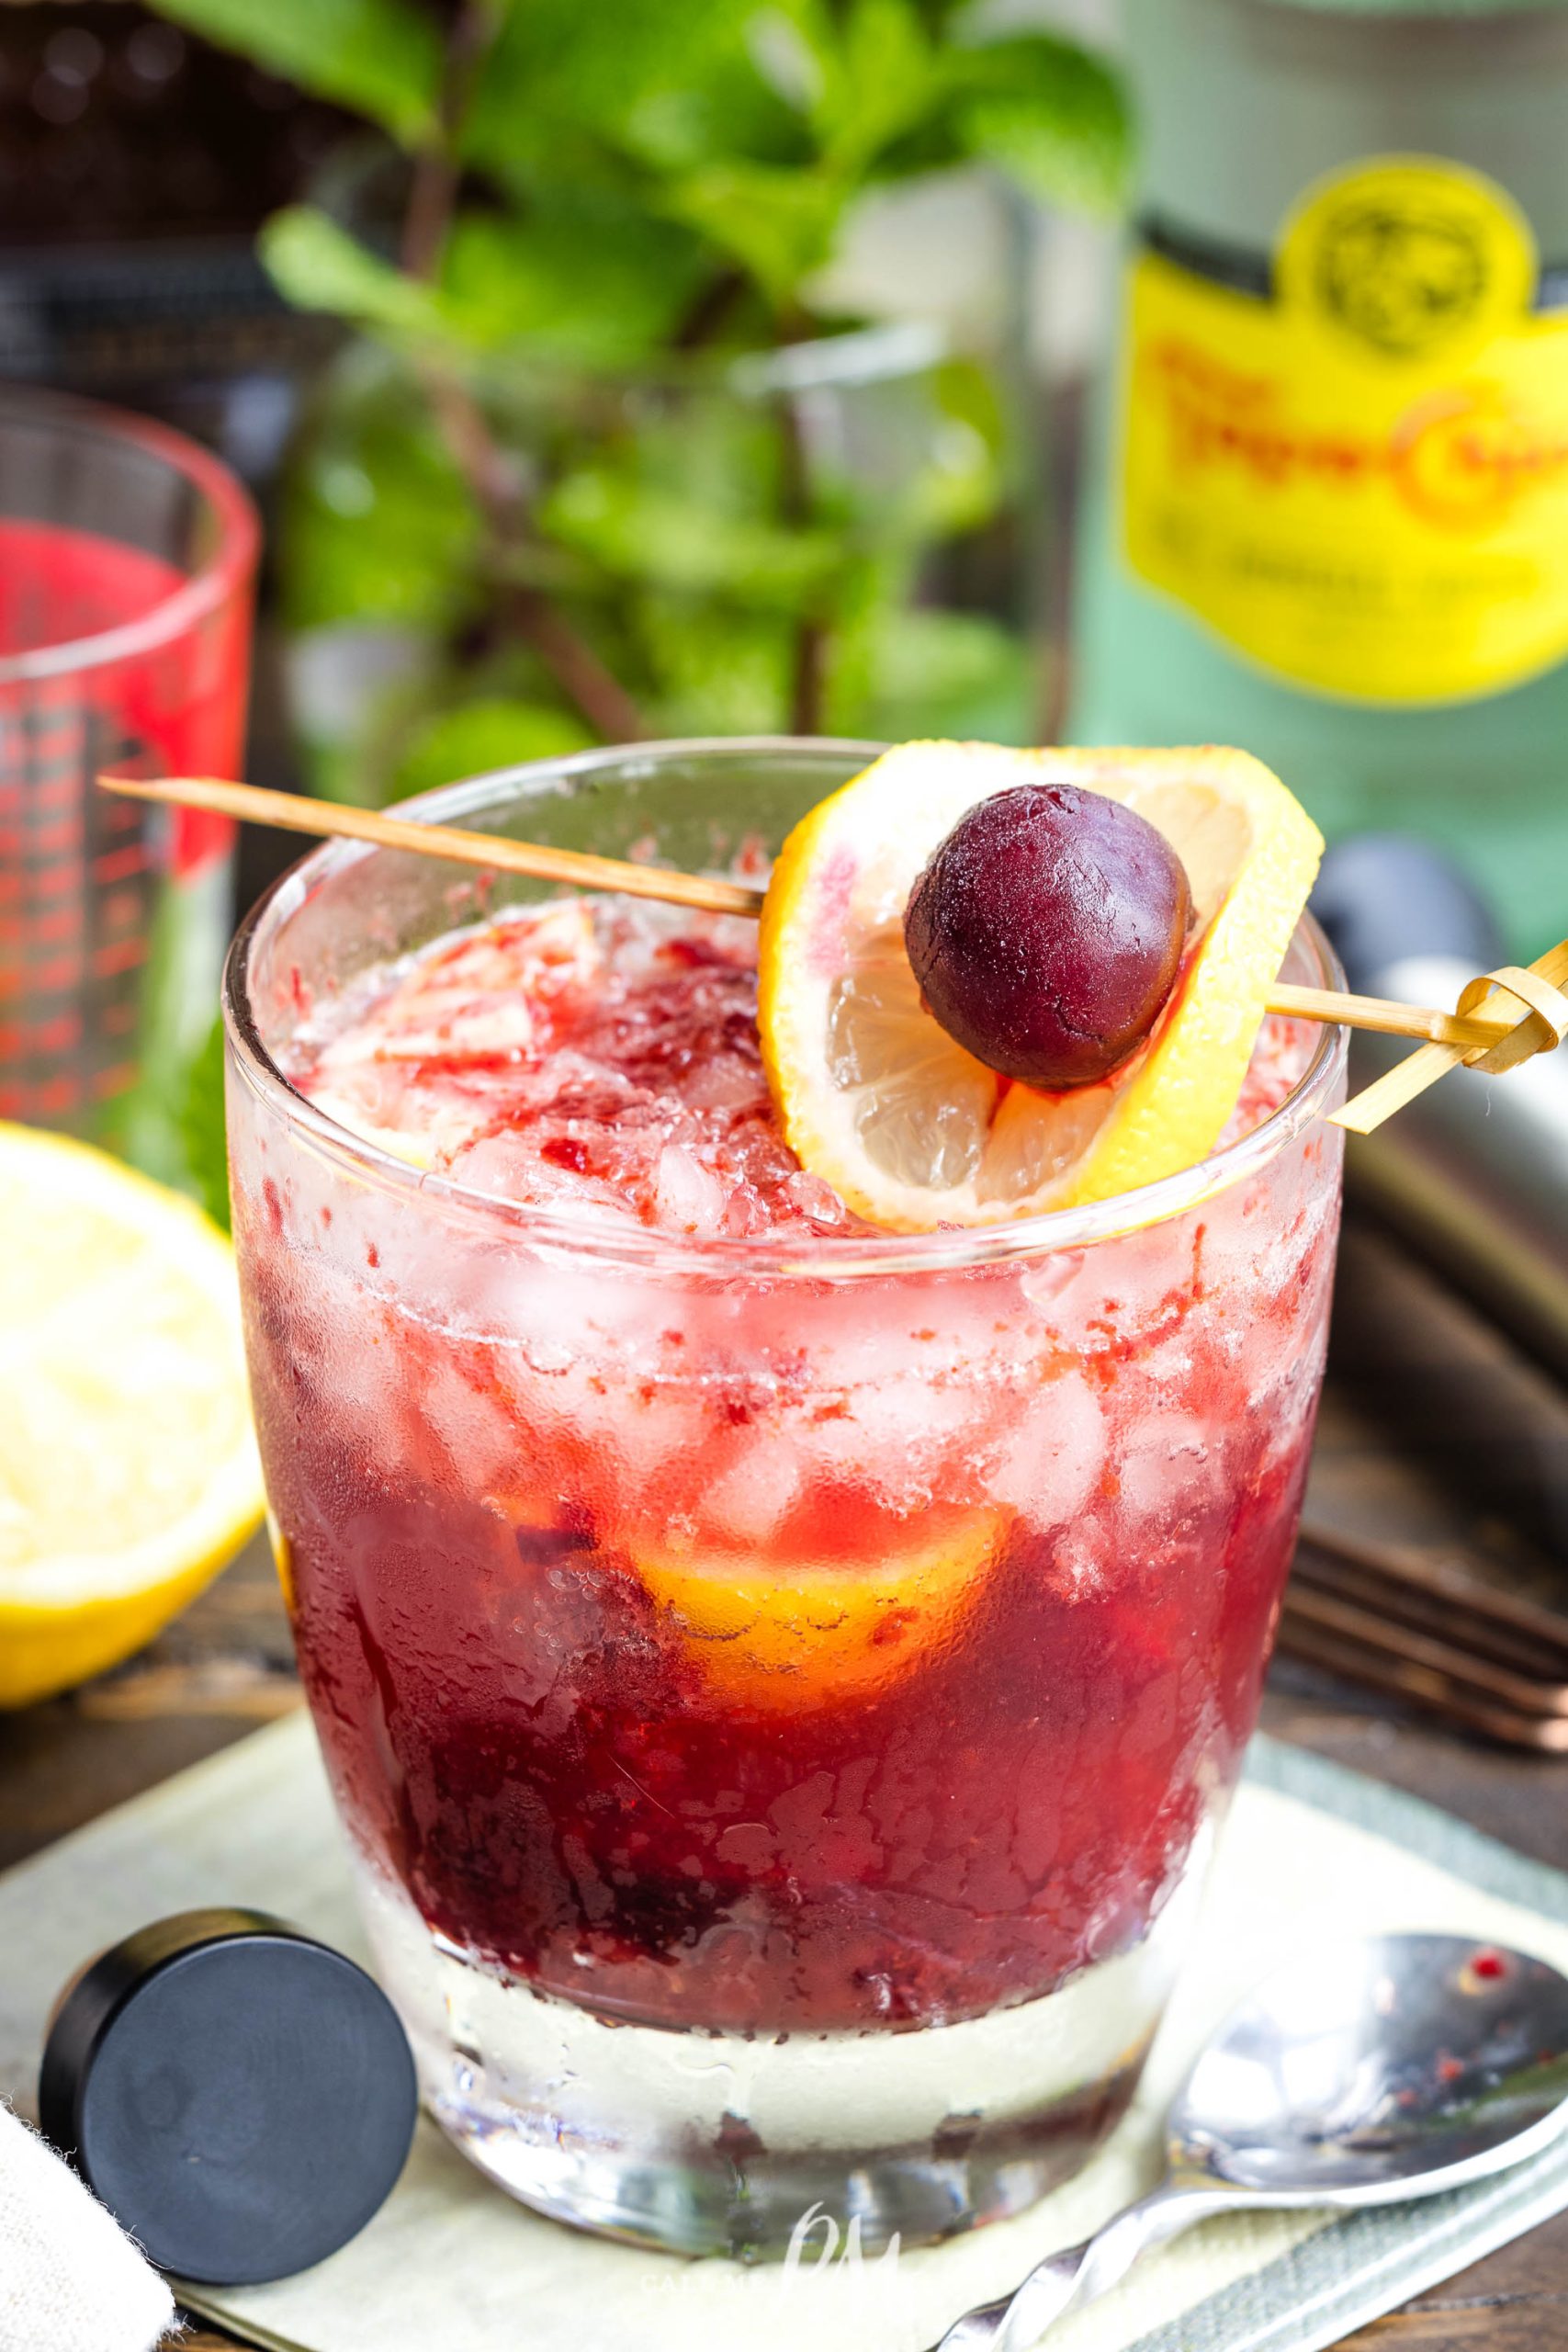 A Fizzy Cherry Bourbon Sour cocktail with crushed ice, adorned with a cherry and lemon slice, served in a glass on a rustic table with a vibrant background.